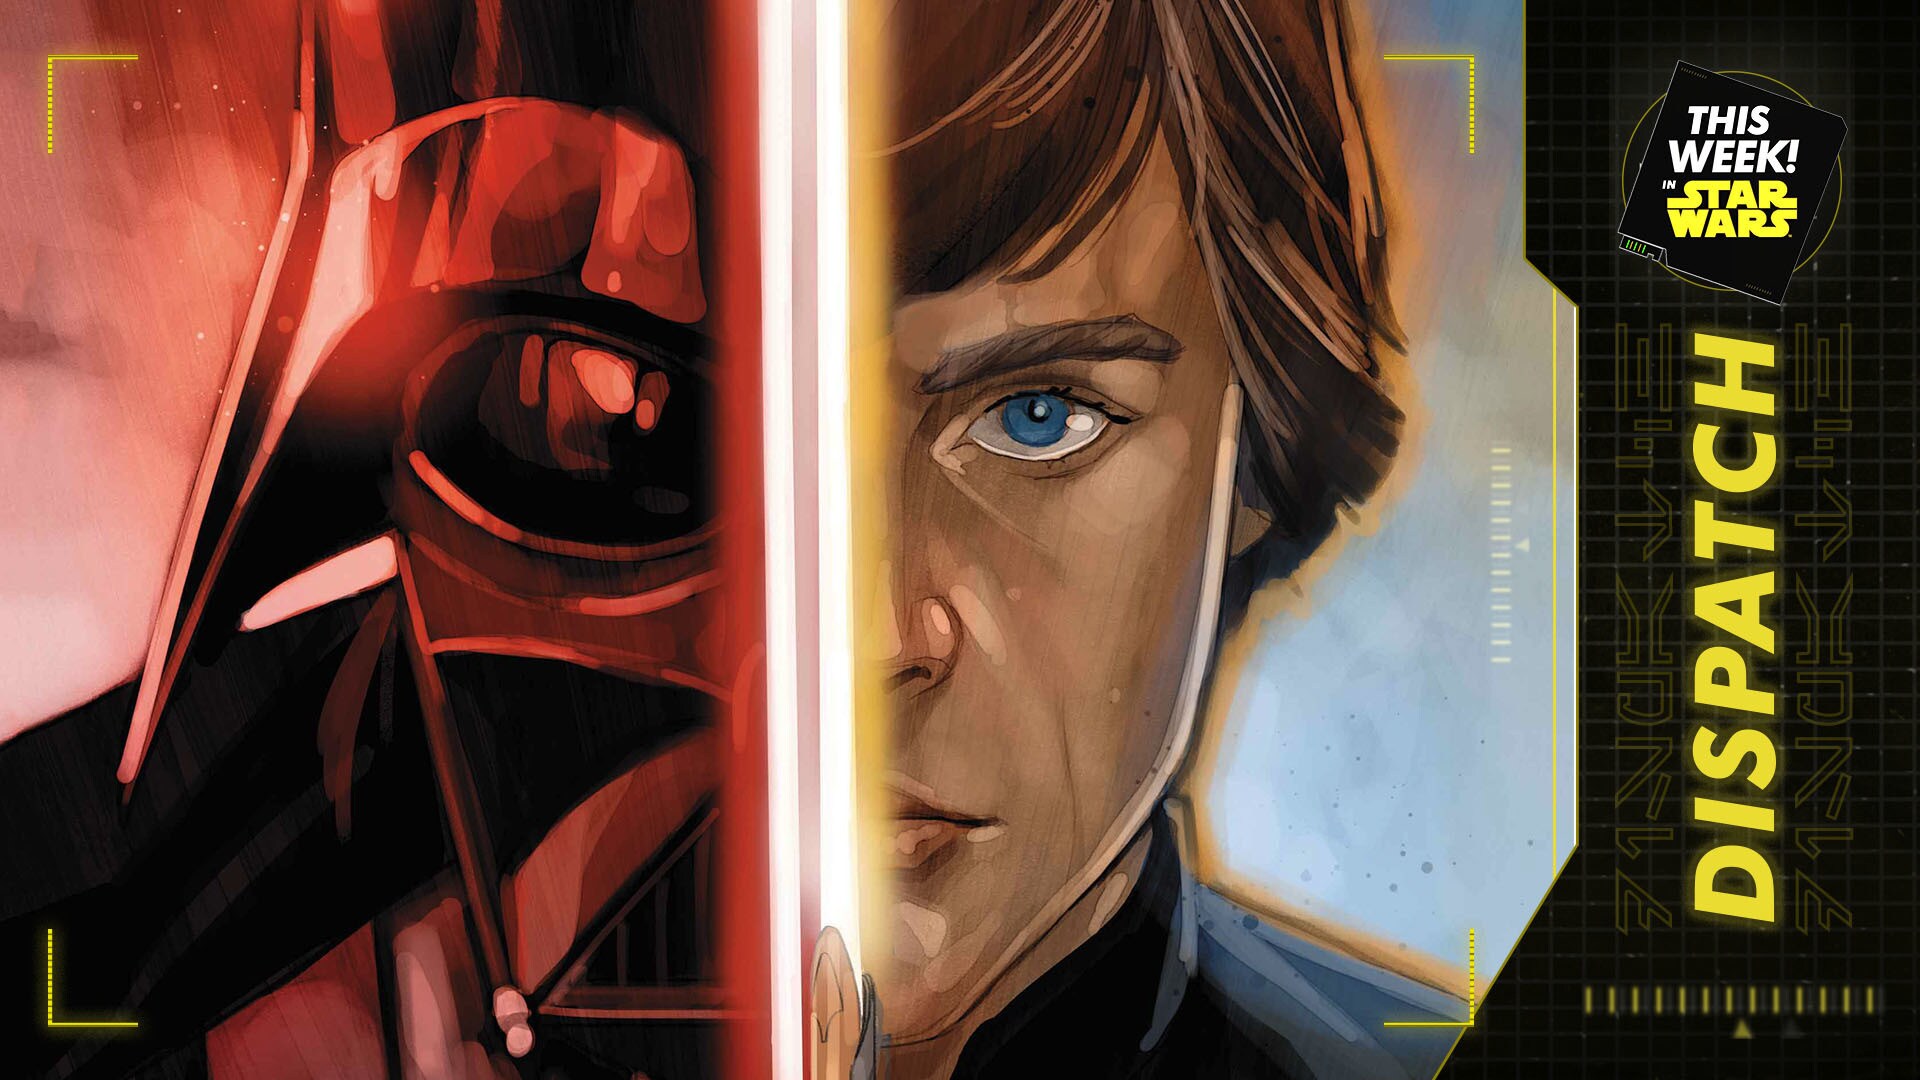 Star Wars on Free Comic Book Day | This Week! in Star Wars Dispatch